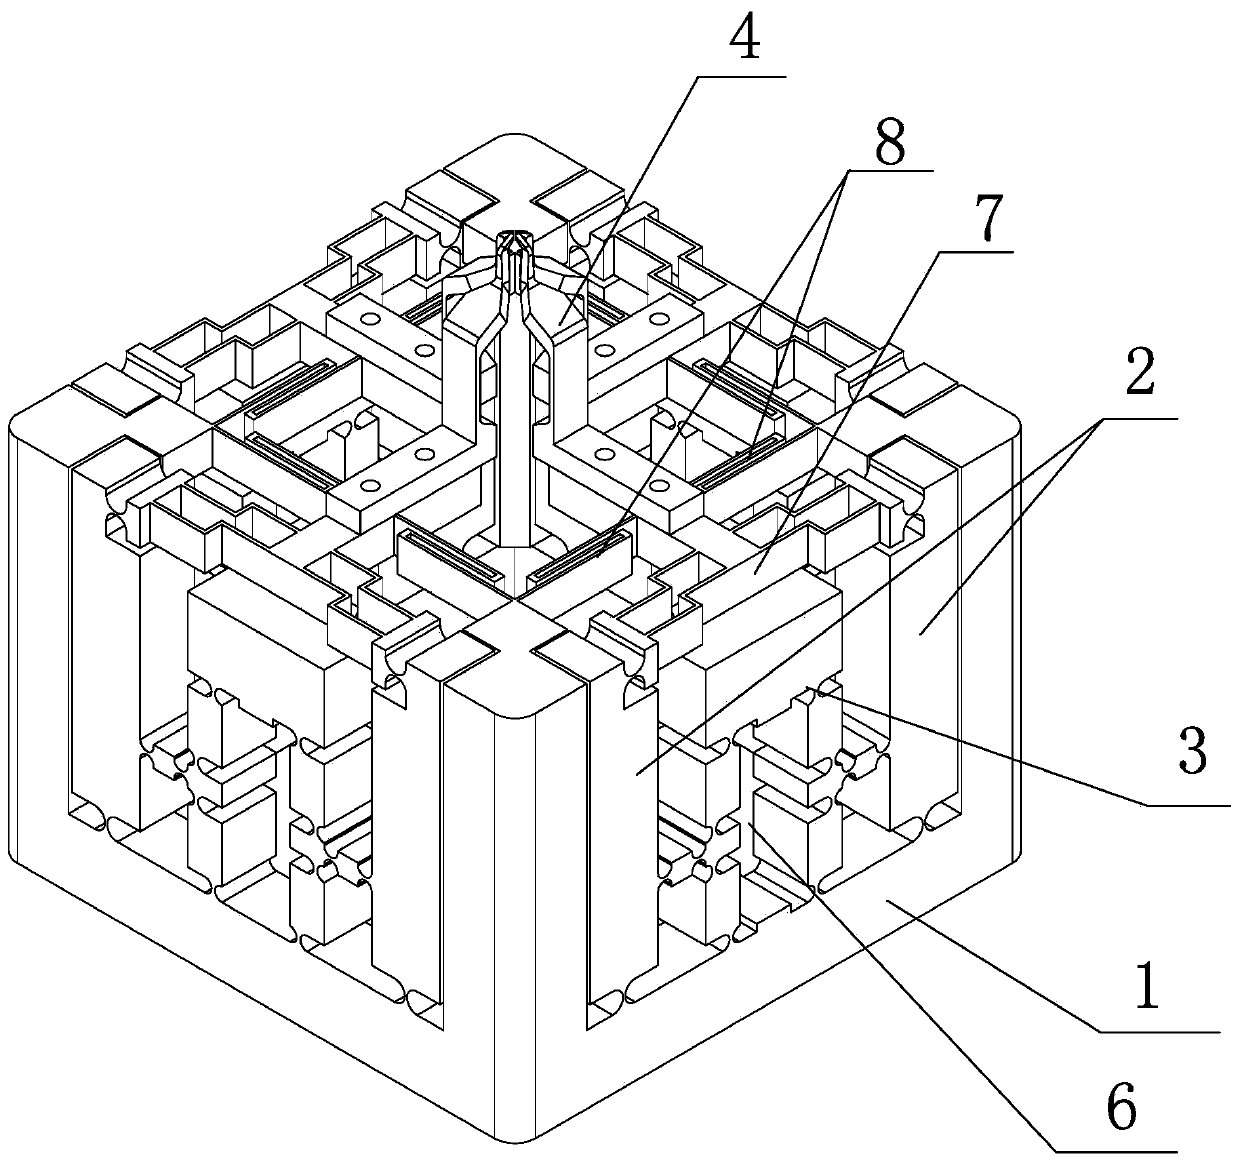 Symmetric spatial three-dimensional micro manipulator with three-stage motion amplifying mechanism